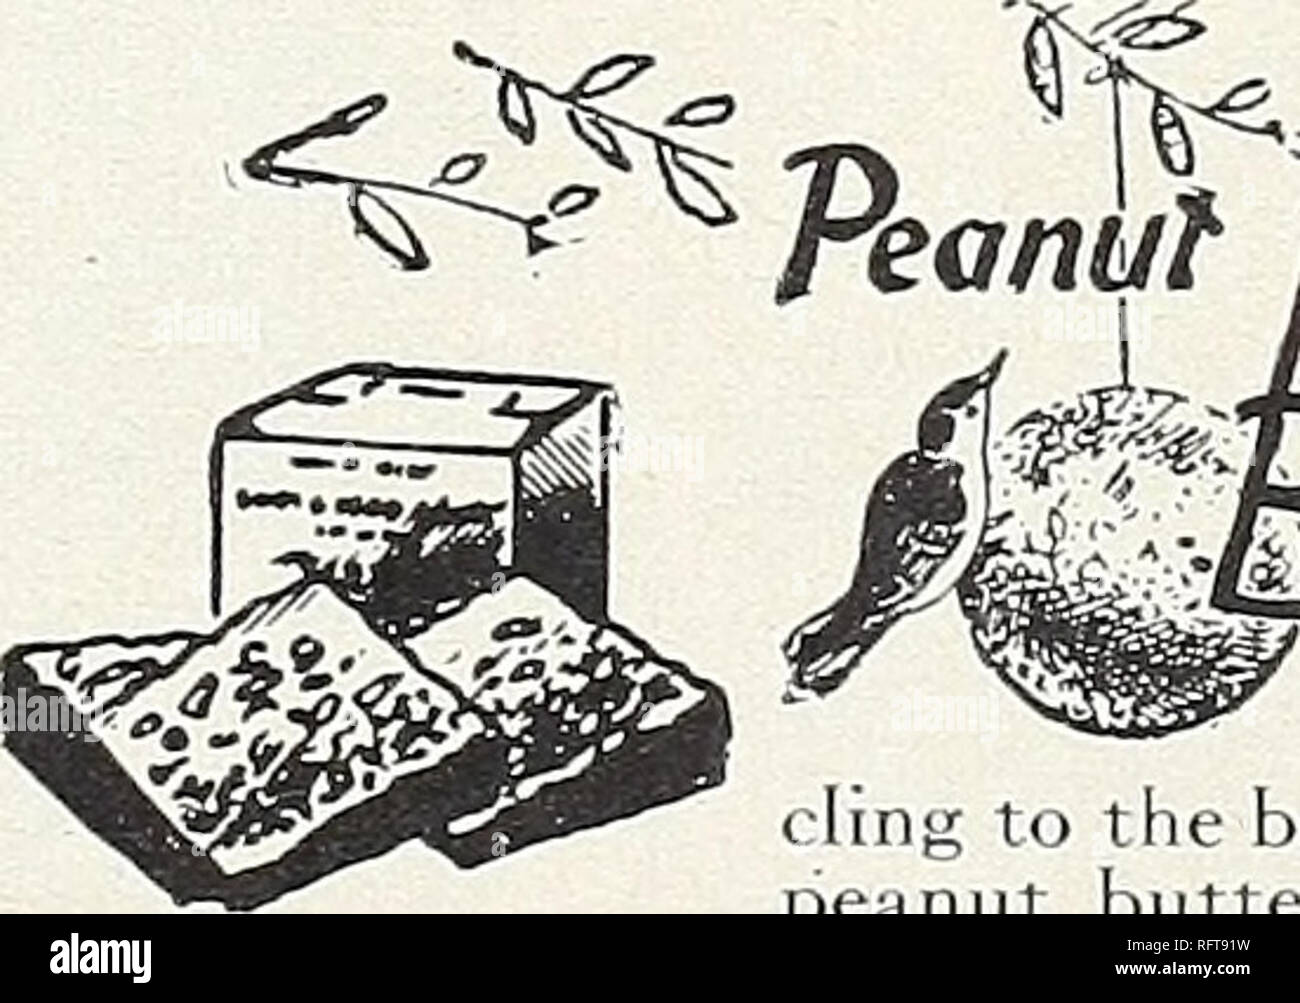 . Capitol city seeds for 1958. Nurseries (Horticulture) Catalogs; Bulbs (Plants) Catalogs; Vegetables Catalogs; Garden tools Catalogs; Seeds Catalogs. Assorted seed suet and pressed peanut suet, molded into paper cups. Used as refills for HYDFEEDERS, CD58, CDA, CDD, WI. Box of 24 cups, $1.29. BB2. Peanut Suet Cake. SSI. Seed Suet Cake. Either cake, 35c each; 3 for $1.00 No. 755. WOODLAND CLEAR- VIEW FEEDER The most widely sold feeder in America today. Made of California Redwood and sturdily built. Holds about 4 lbs. feed. 11 in. long, 8 in. wide, 8 in. high. $3.98. No. 1603. WOODLAND WINDOW OR Stock Photo